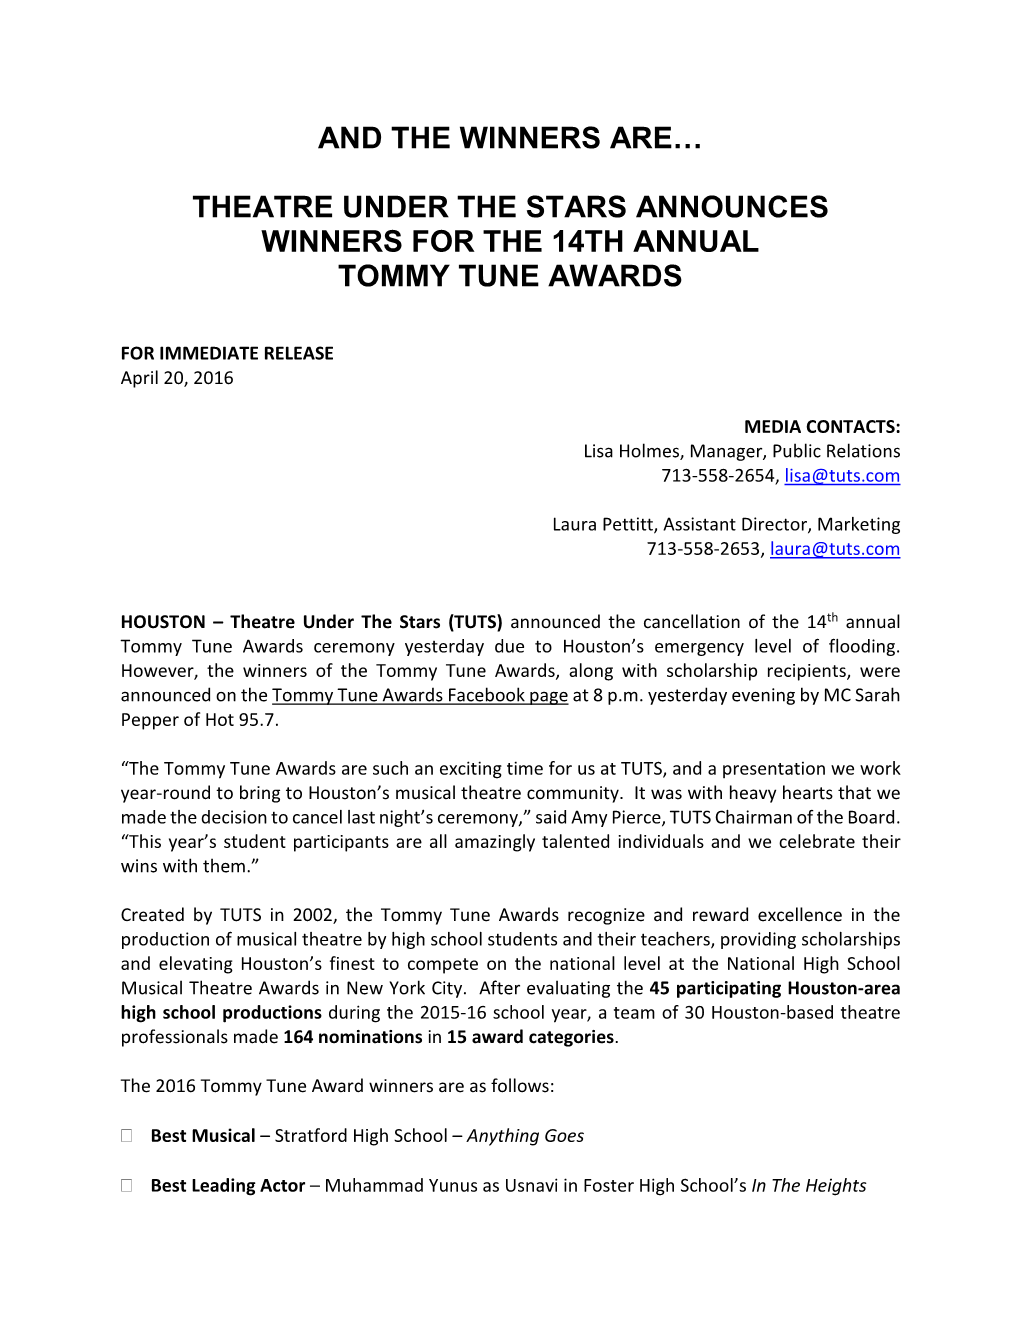 Theatre Under the Stars Announces Winners for the 14Th Annual Tommy Tune Awards